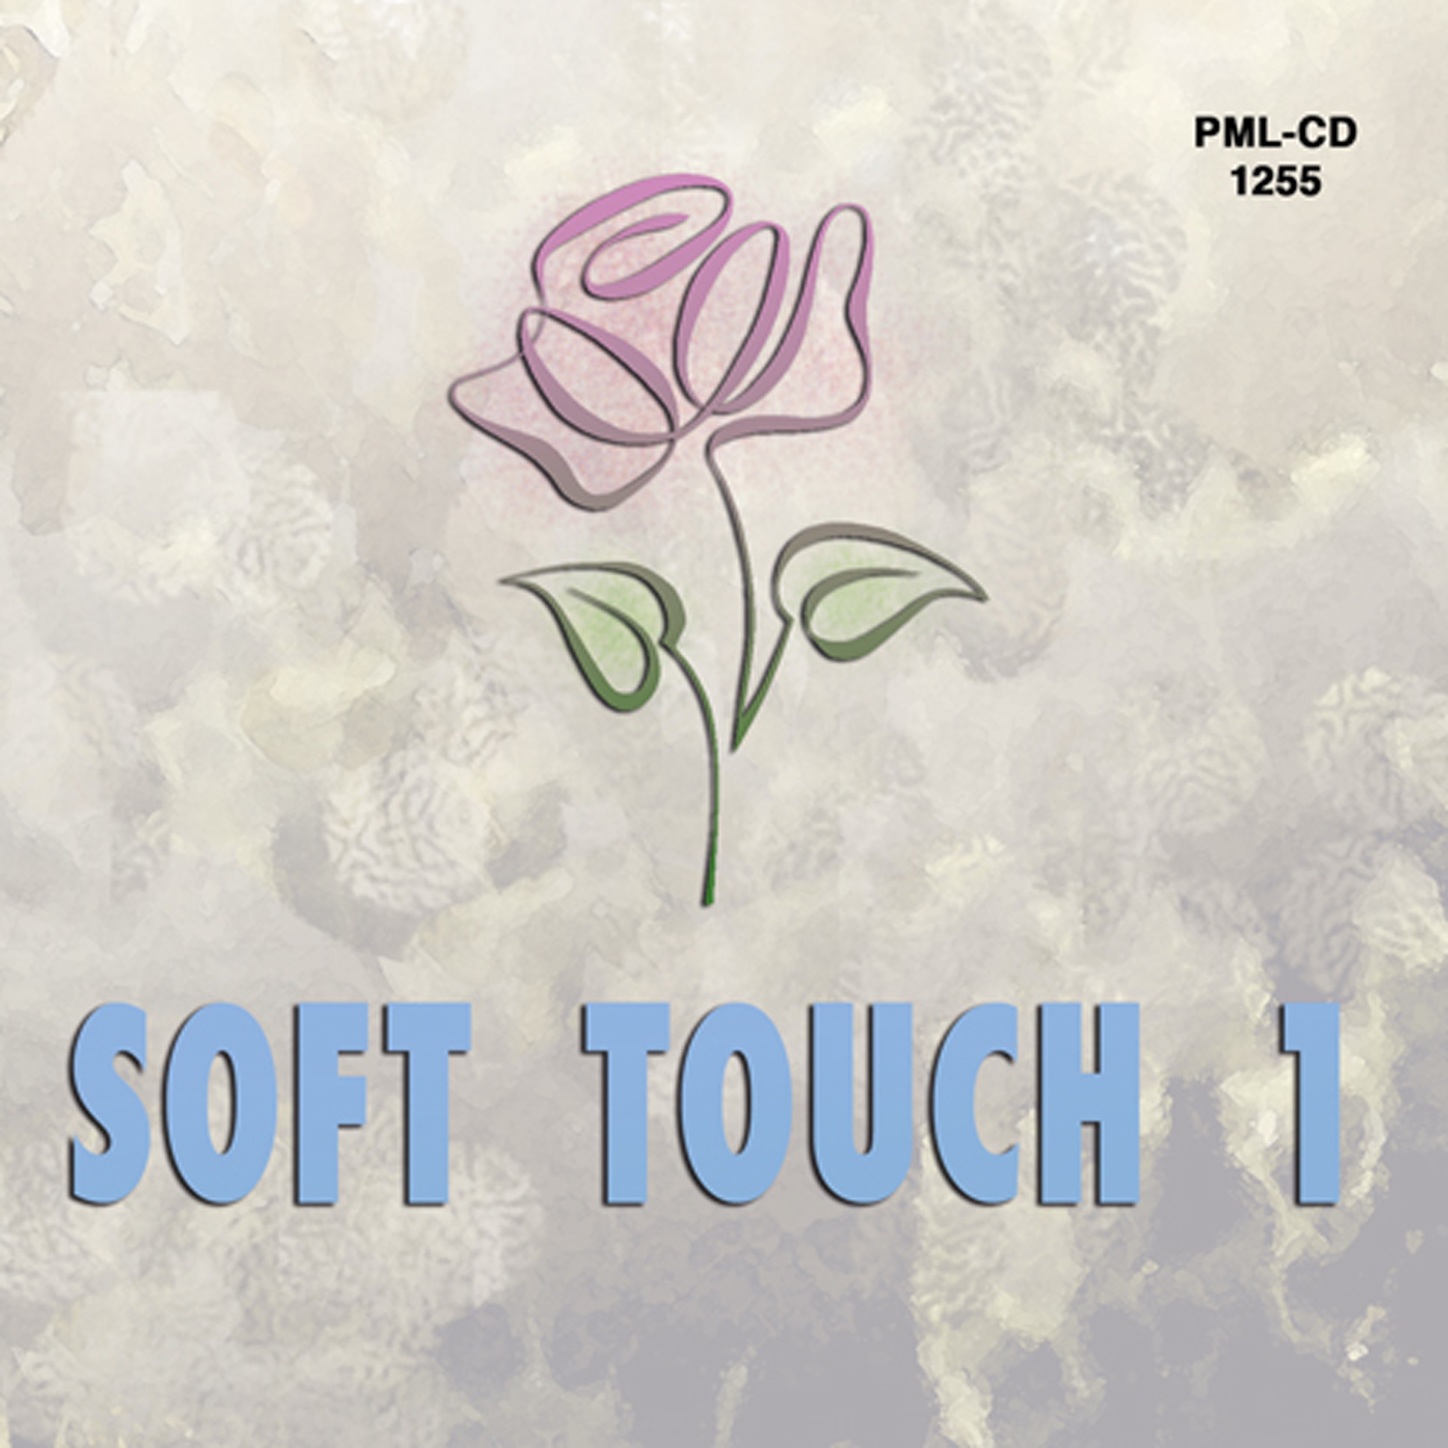 Soft Touch, Vol. 1